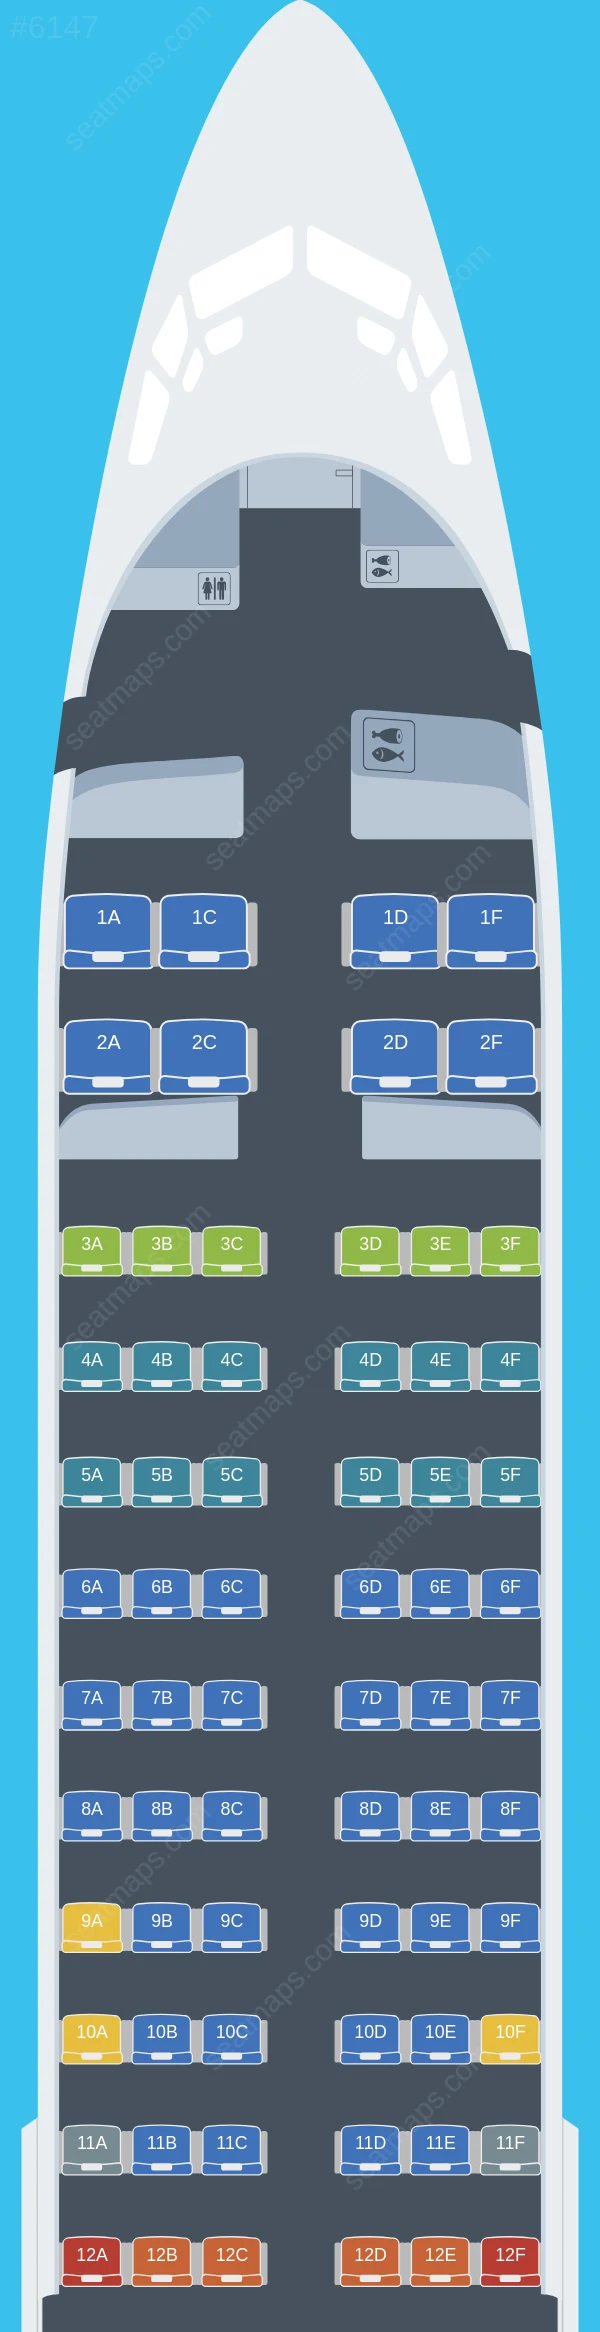 Shandong Airlines Boeing 737-800 seatmap preview